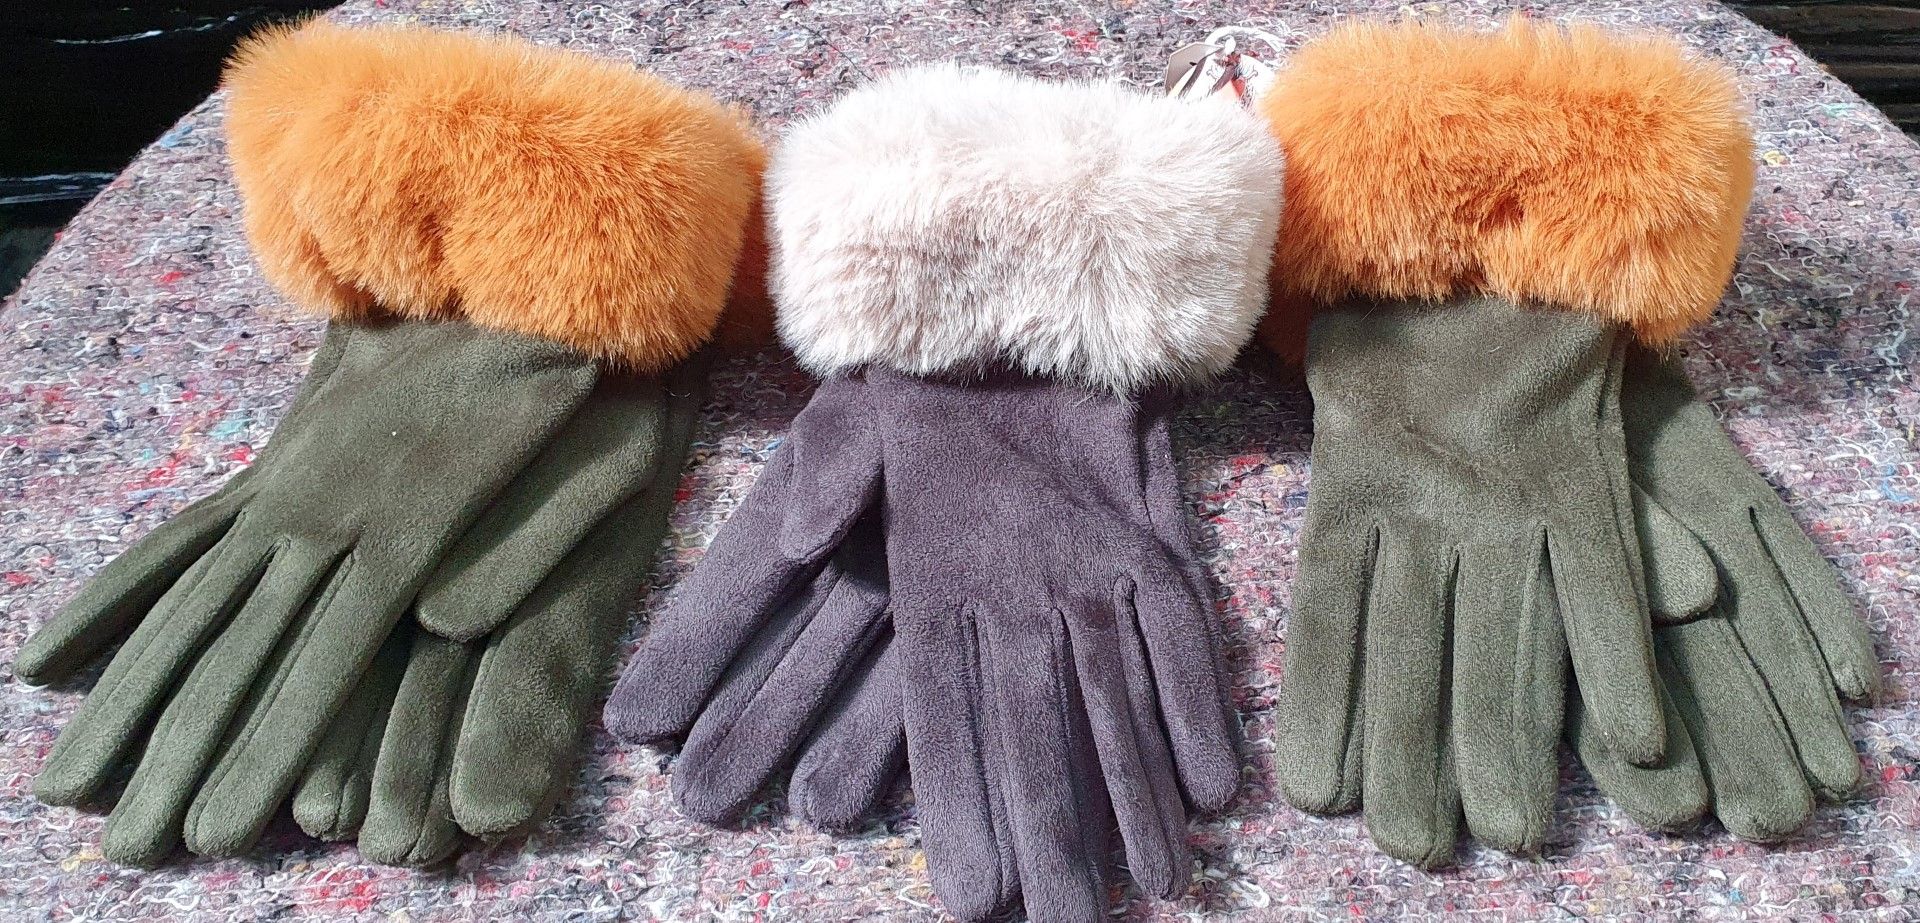 10 x Powder Woolly Bobble Hats and Velvet Gloves With Woolly Cuffs - New Stock - Ref: TCH242 - CL840 - Image 3 of 17